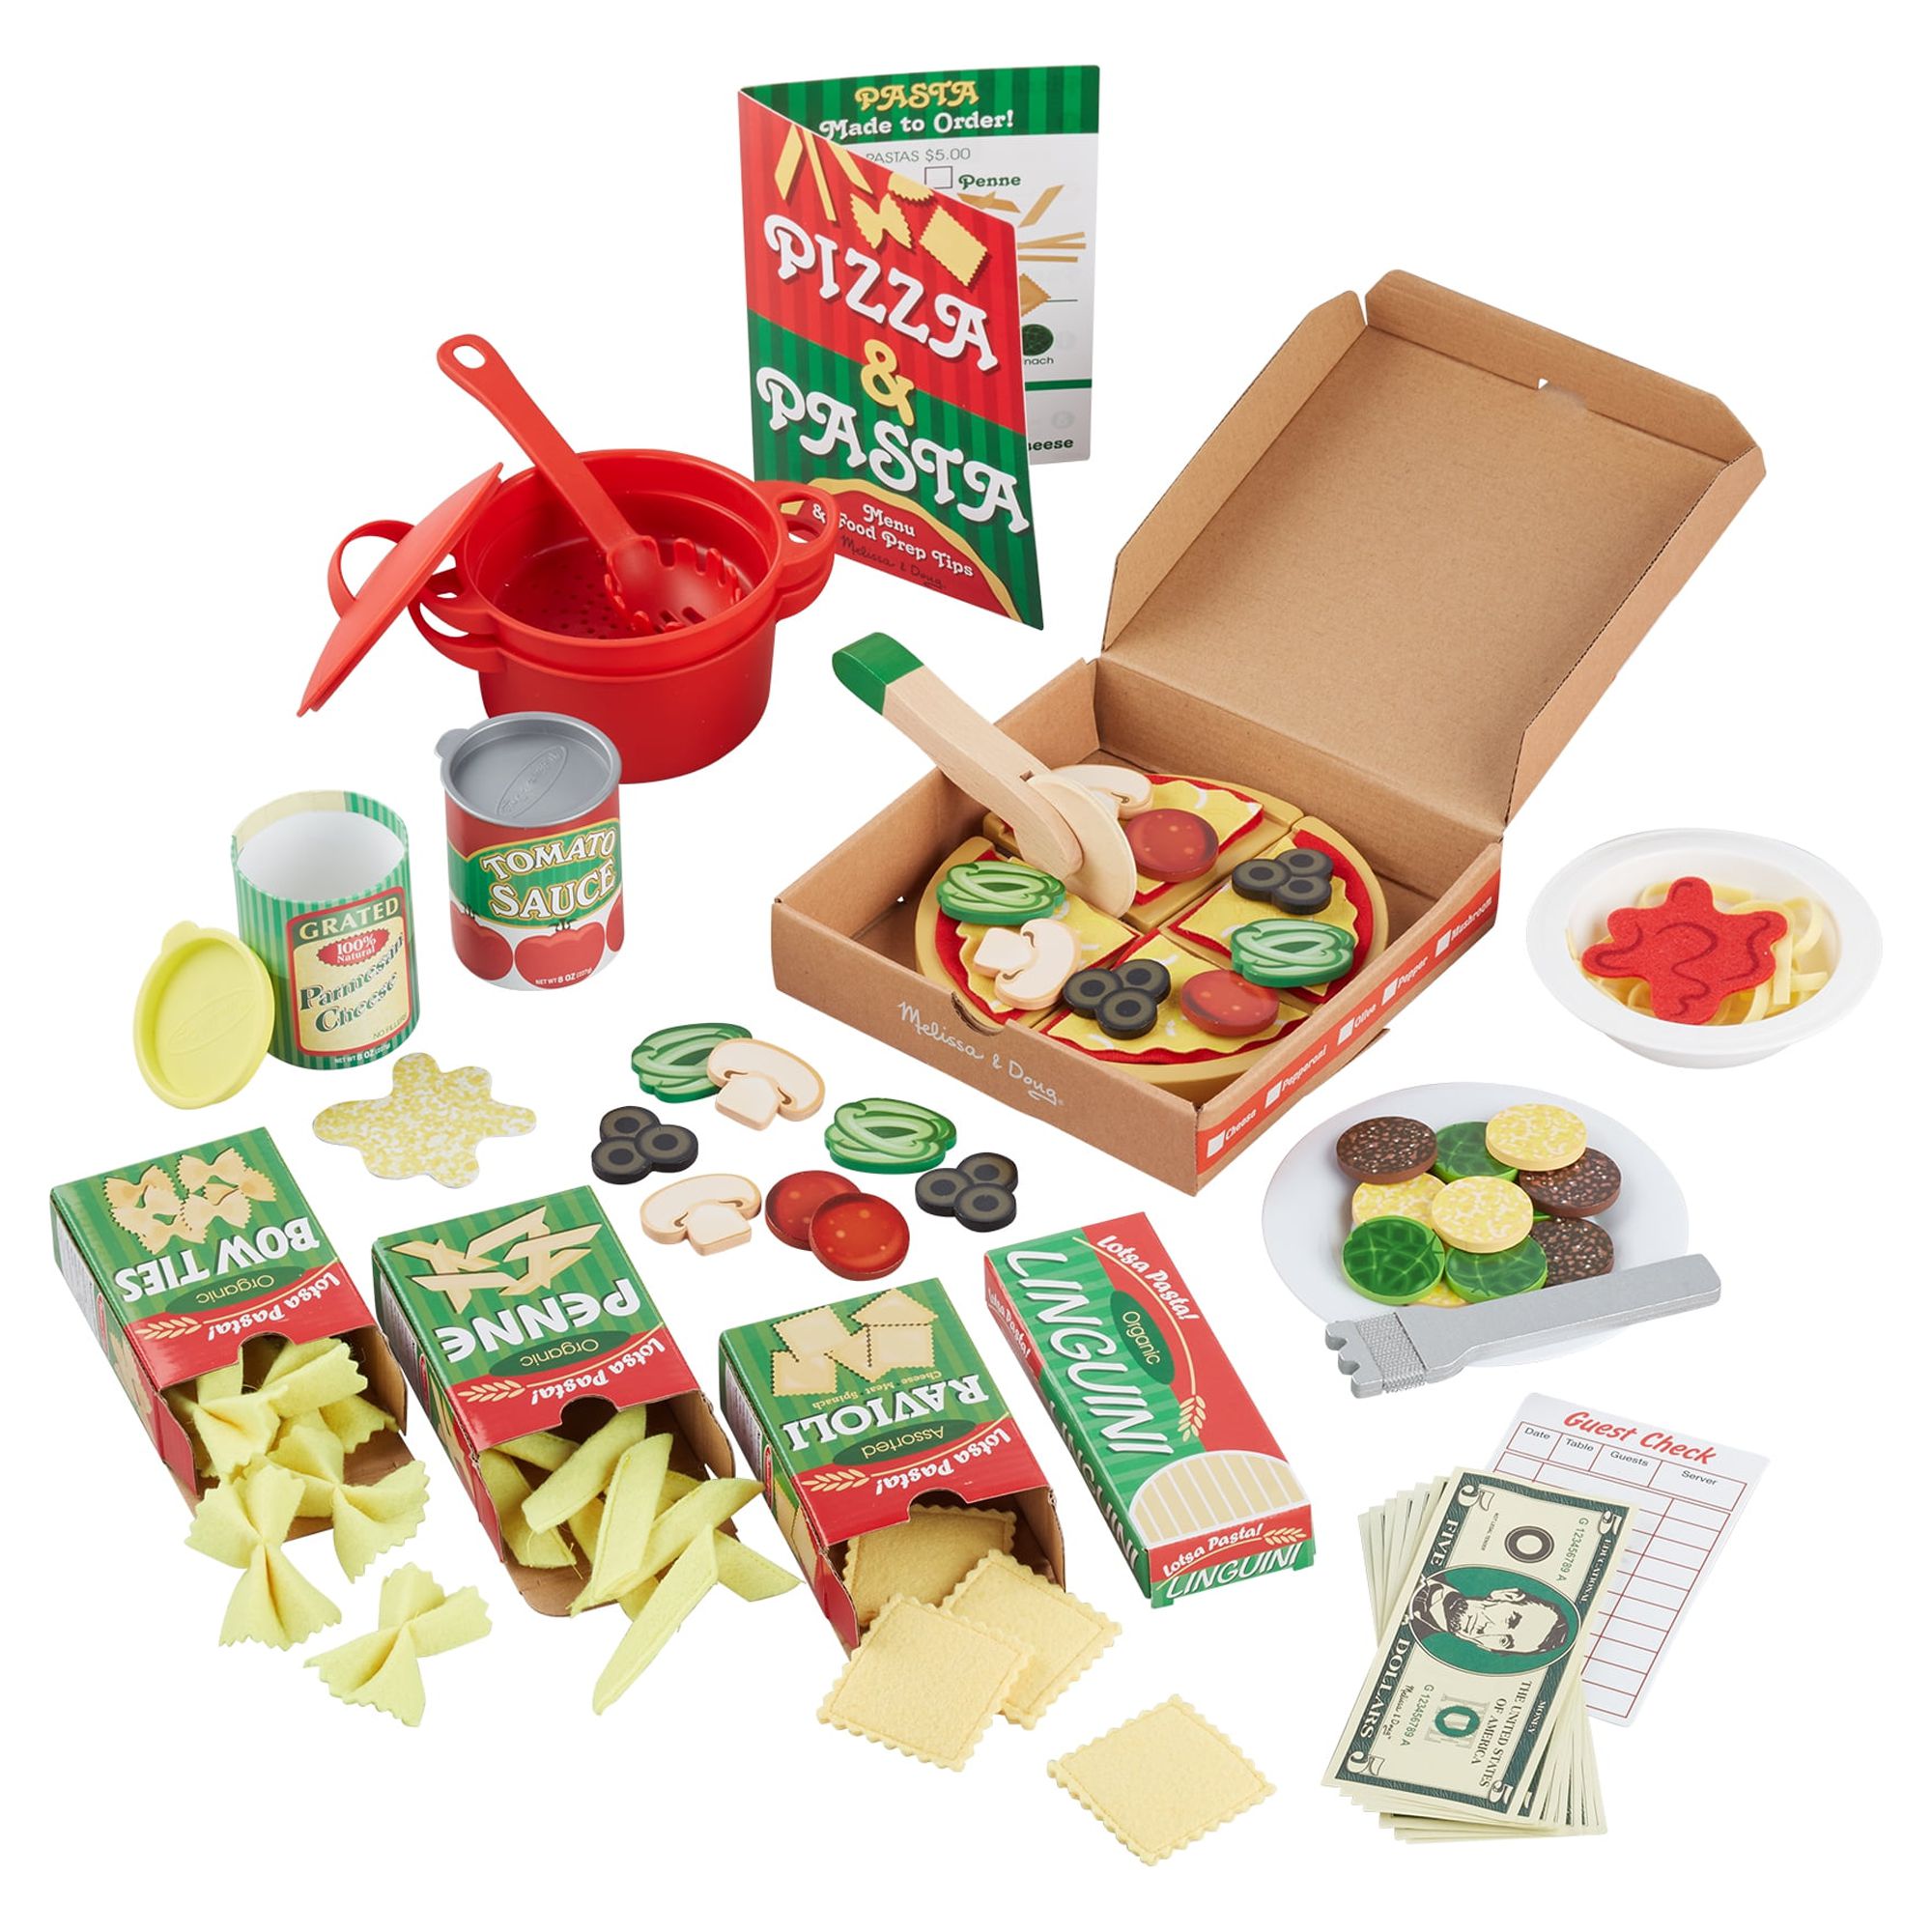 Melissa & Doug Deluxe Pizza & Pasta Play Set Pretend Play Food - 92 Pieces - image 1 of 9